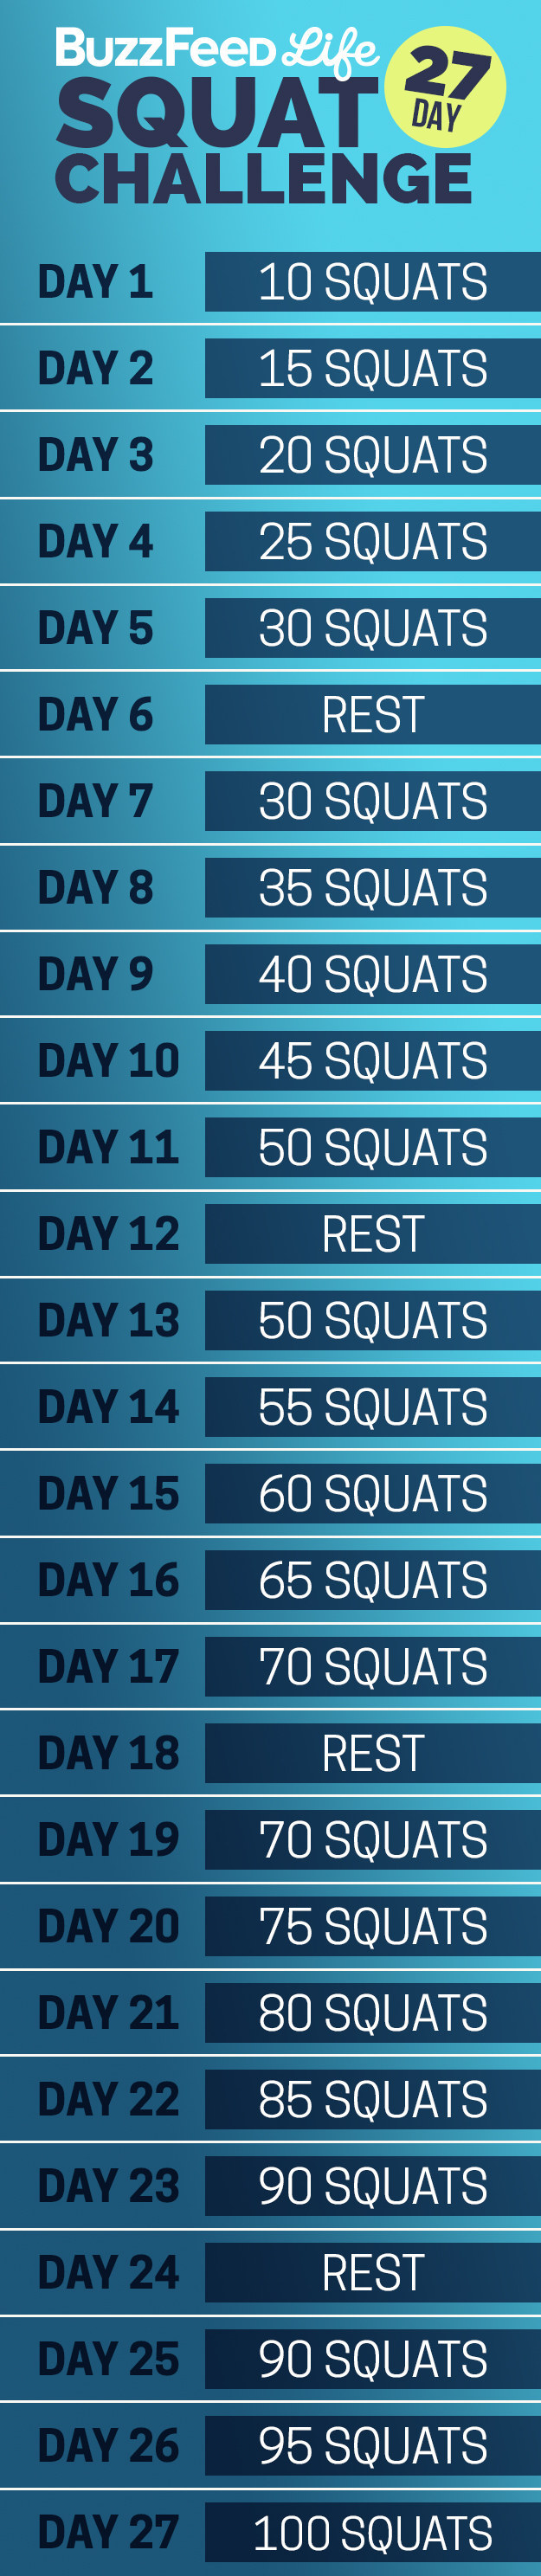 Here's your daily squat schedule: